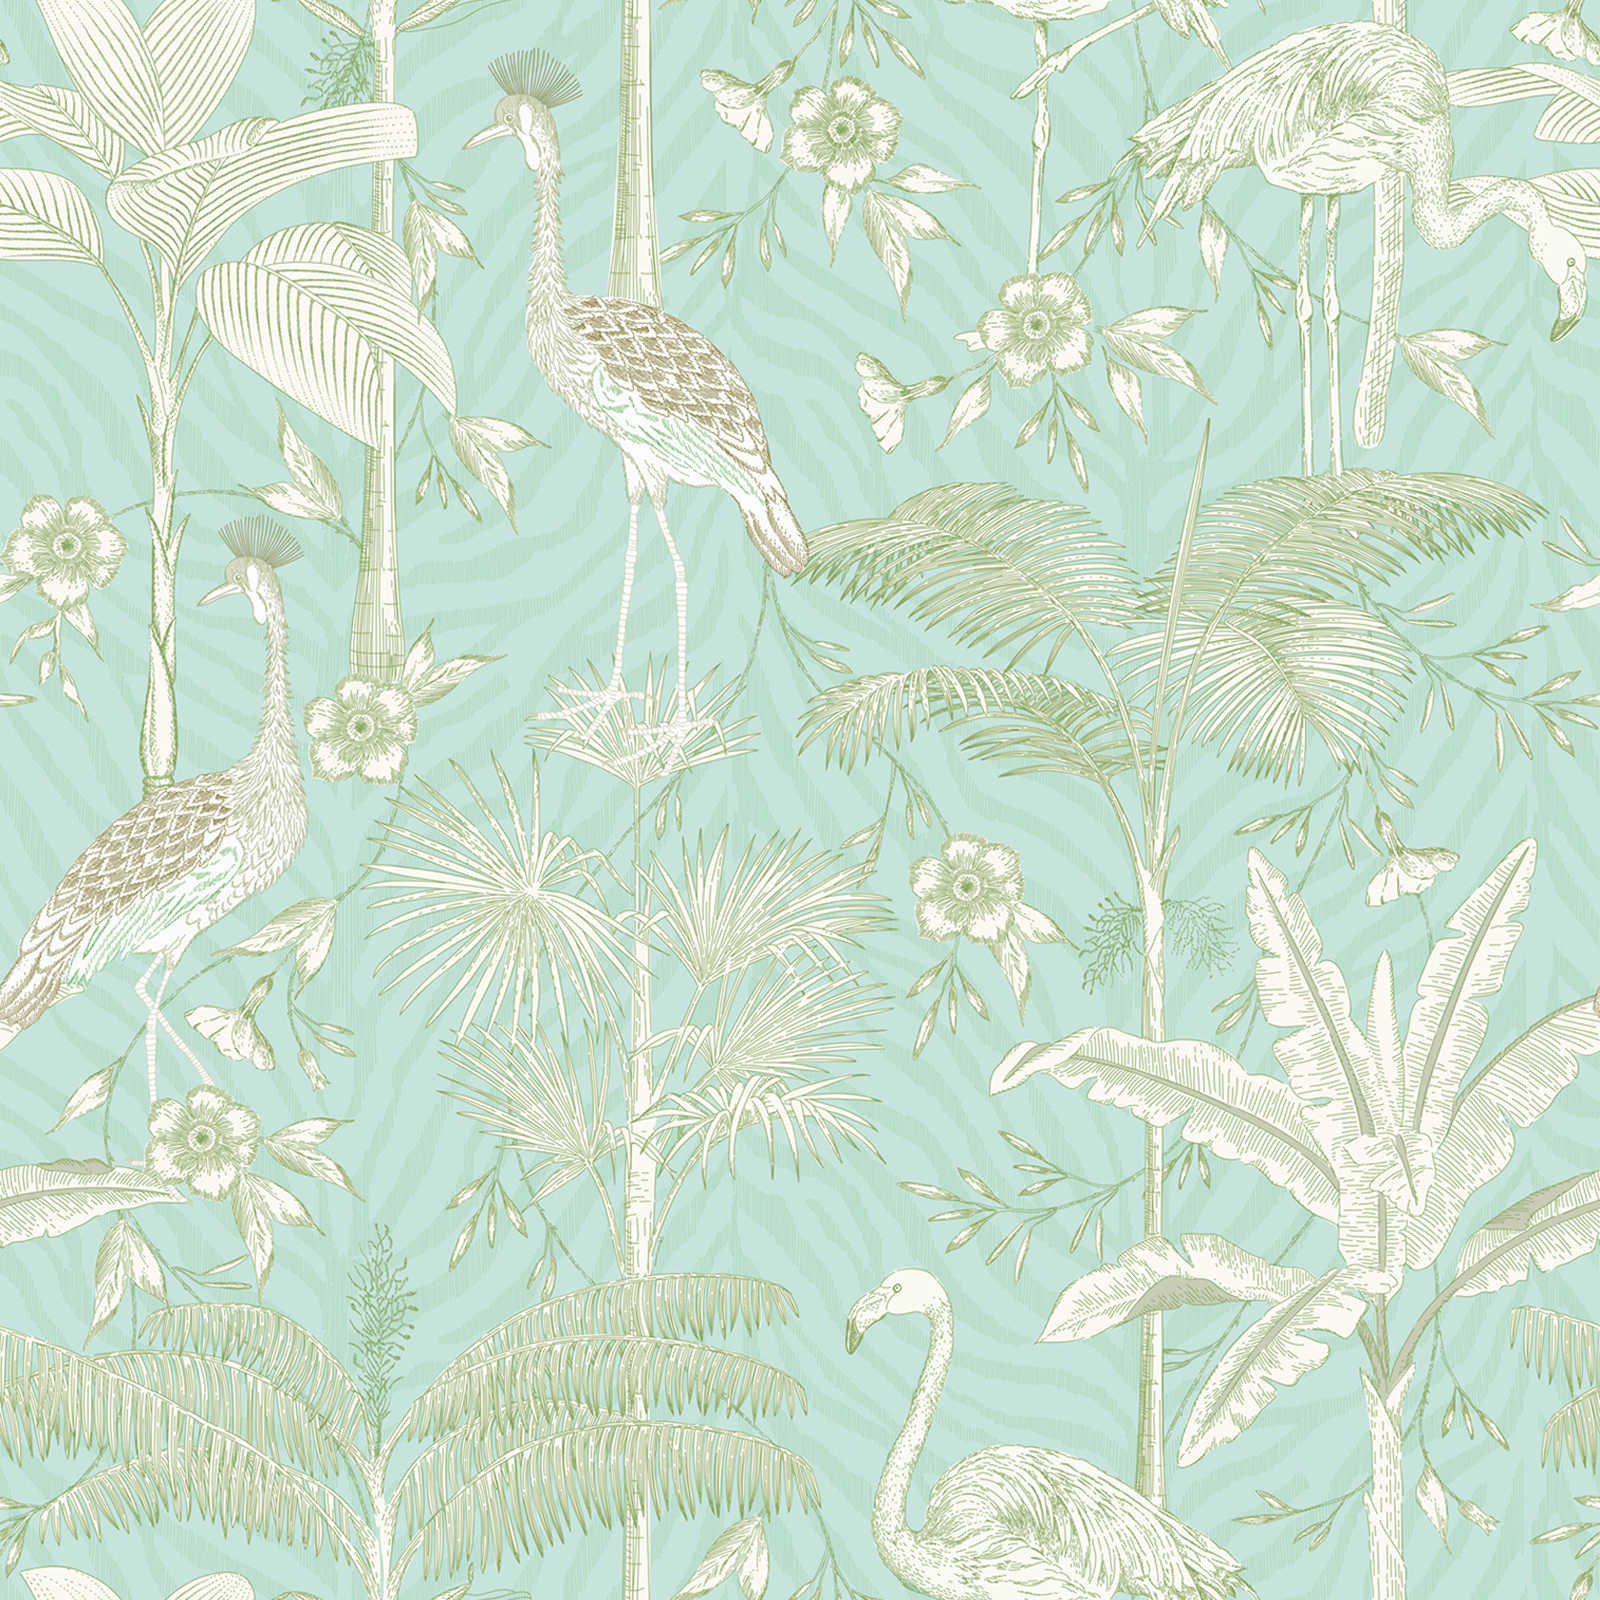 Non-woven wallpaper with flamingos and plants in pale colours - turquoise, white, green
